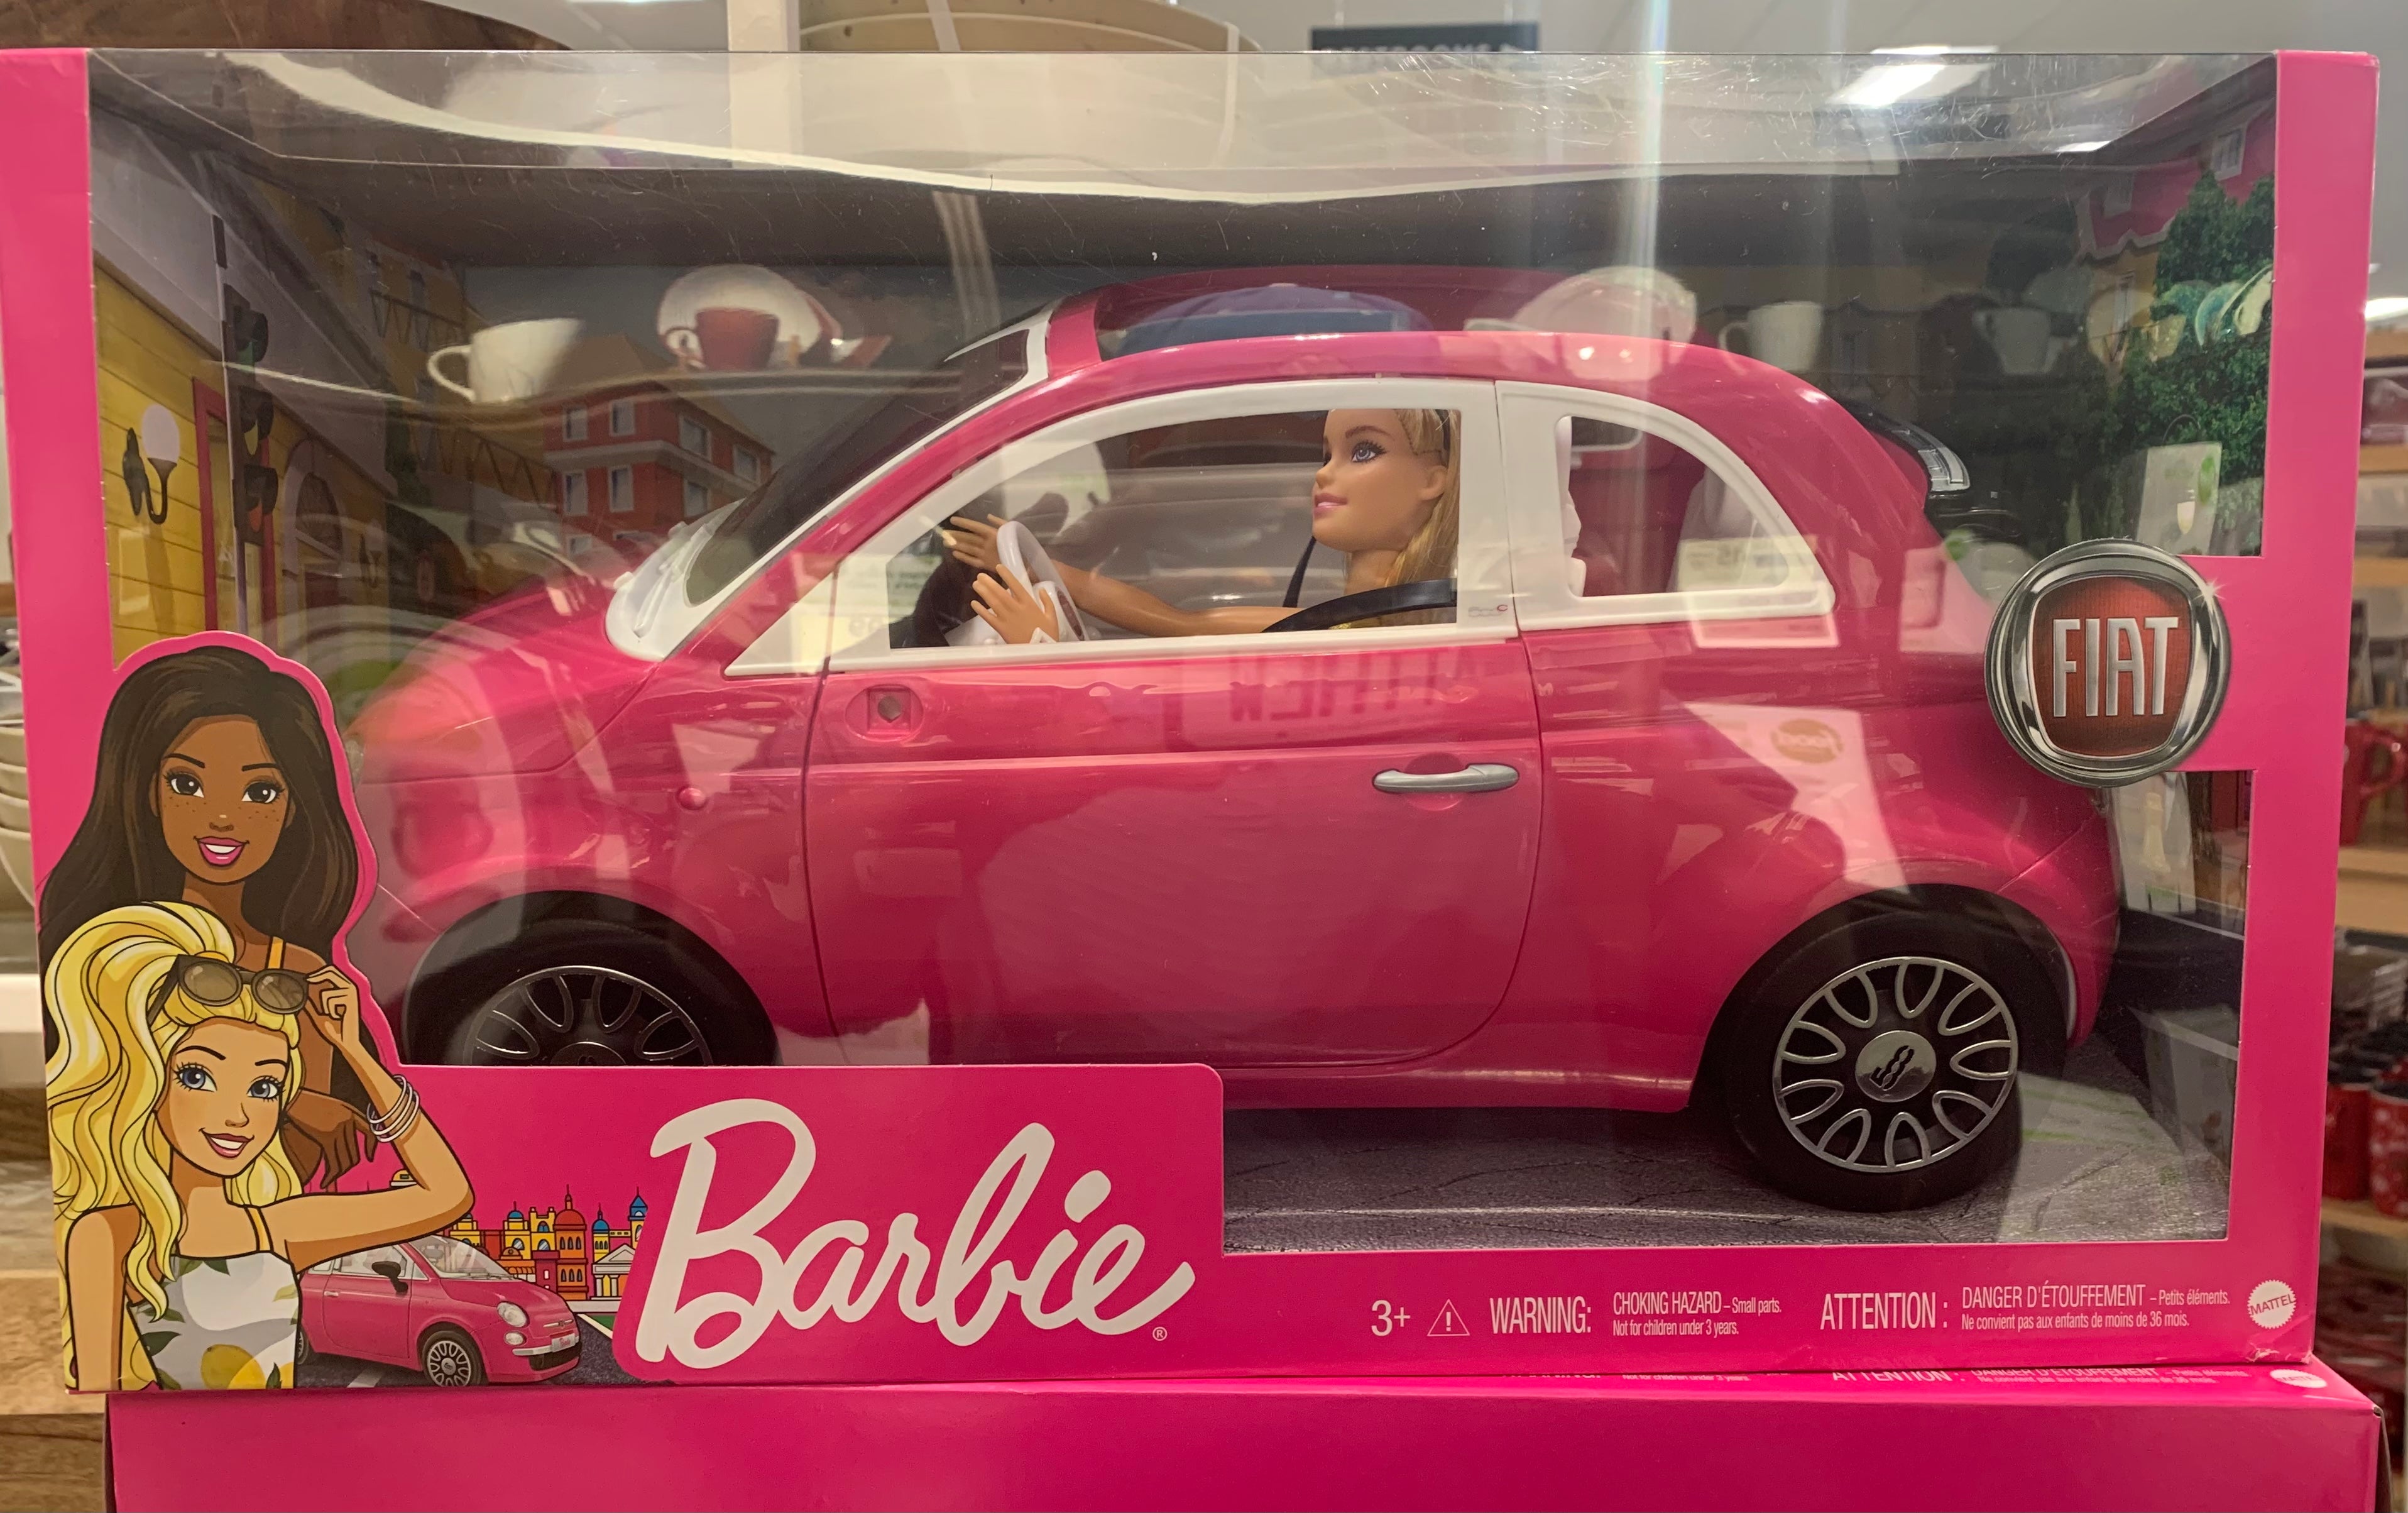 Barbie Fiat 500 Car and Doll Playset - Pink Convertible for Child's